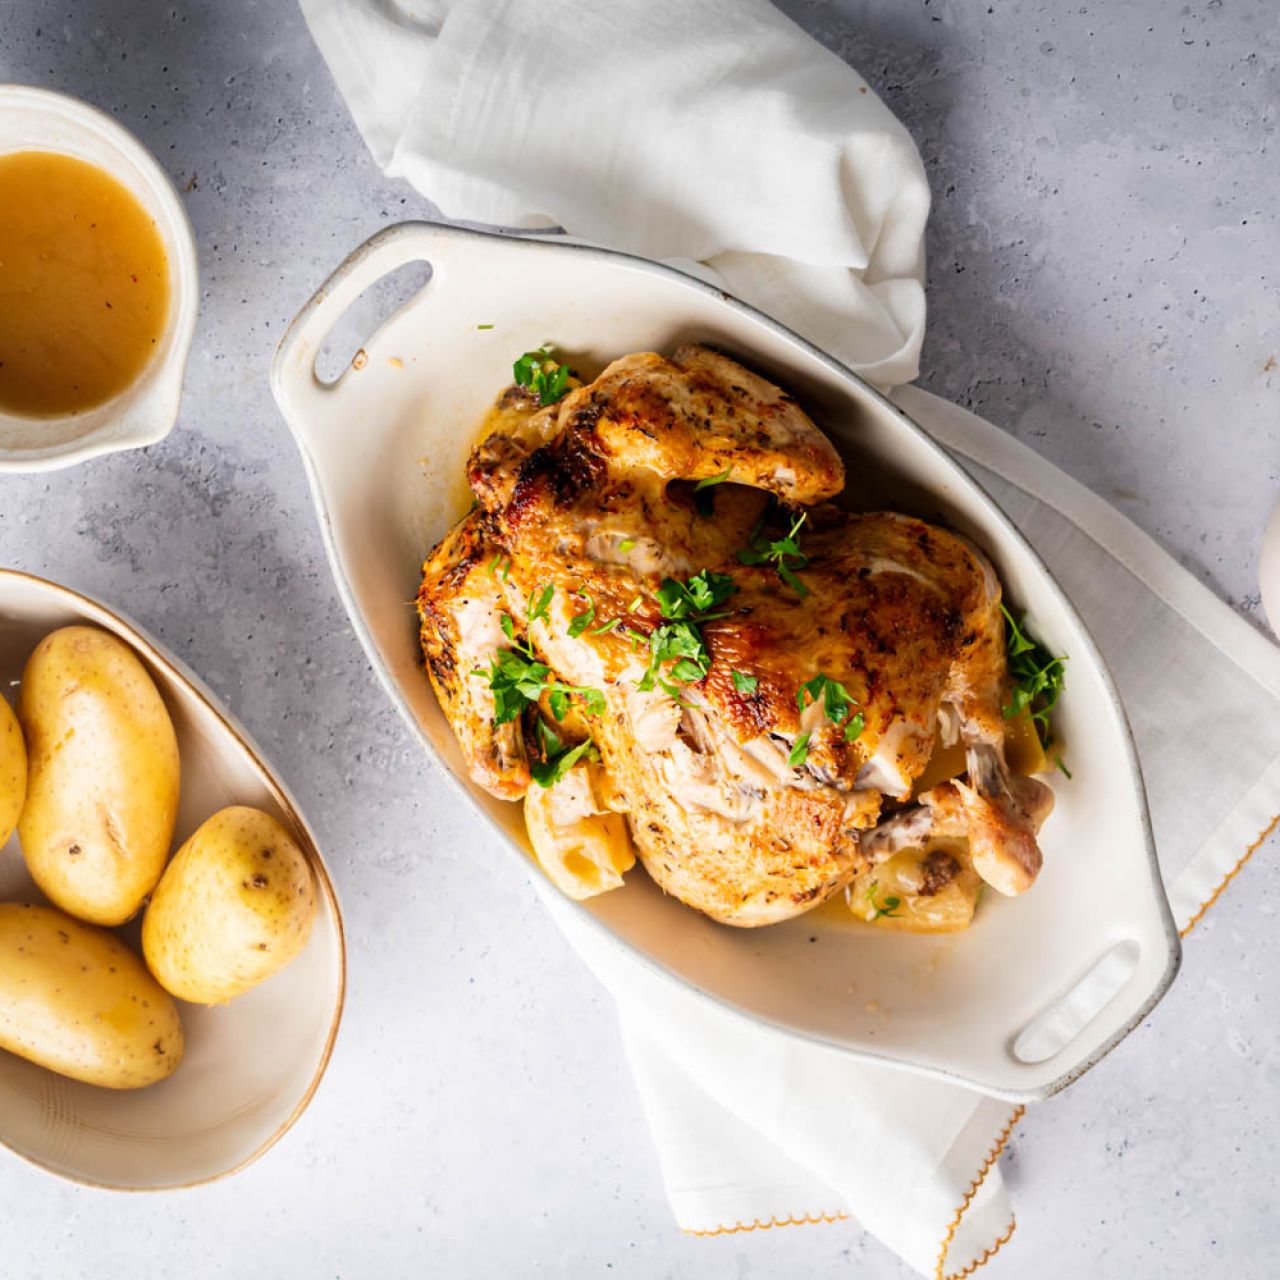 How To Make Rotisserie Chicken in Your Crockpot! - The Kitchen Magpie